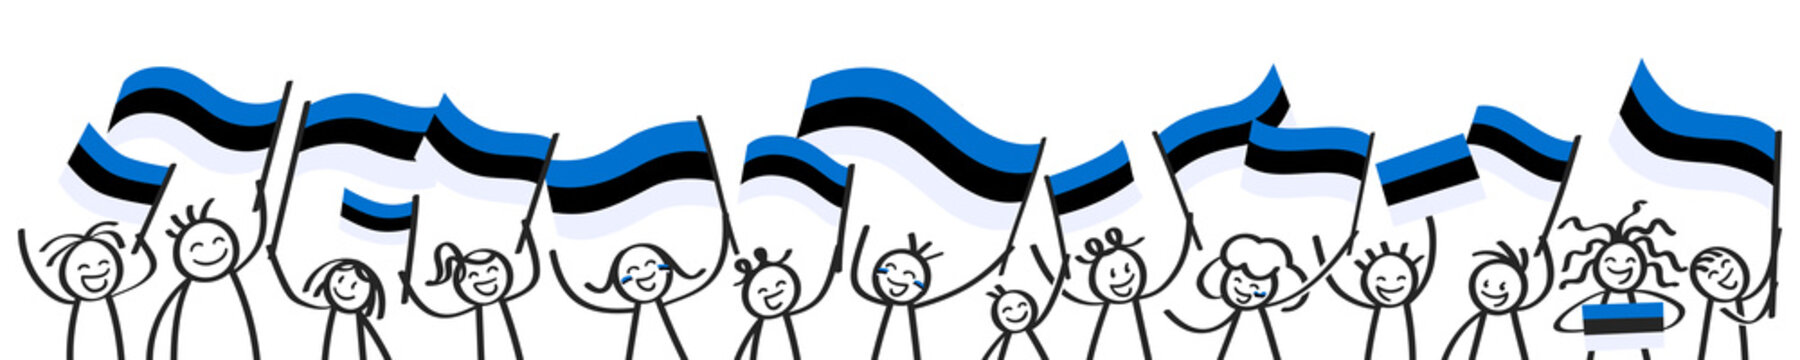 Cheering crowd of happy stick figures with Estonian national flags, smiling Estonia supporters, sports fans isolated on white background